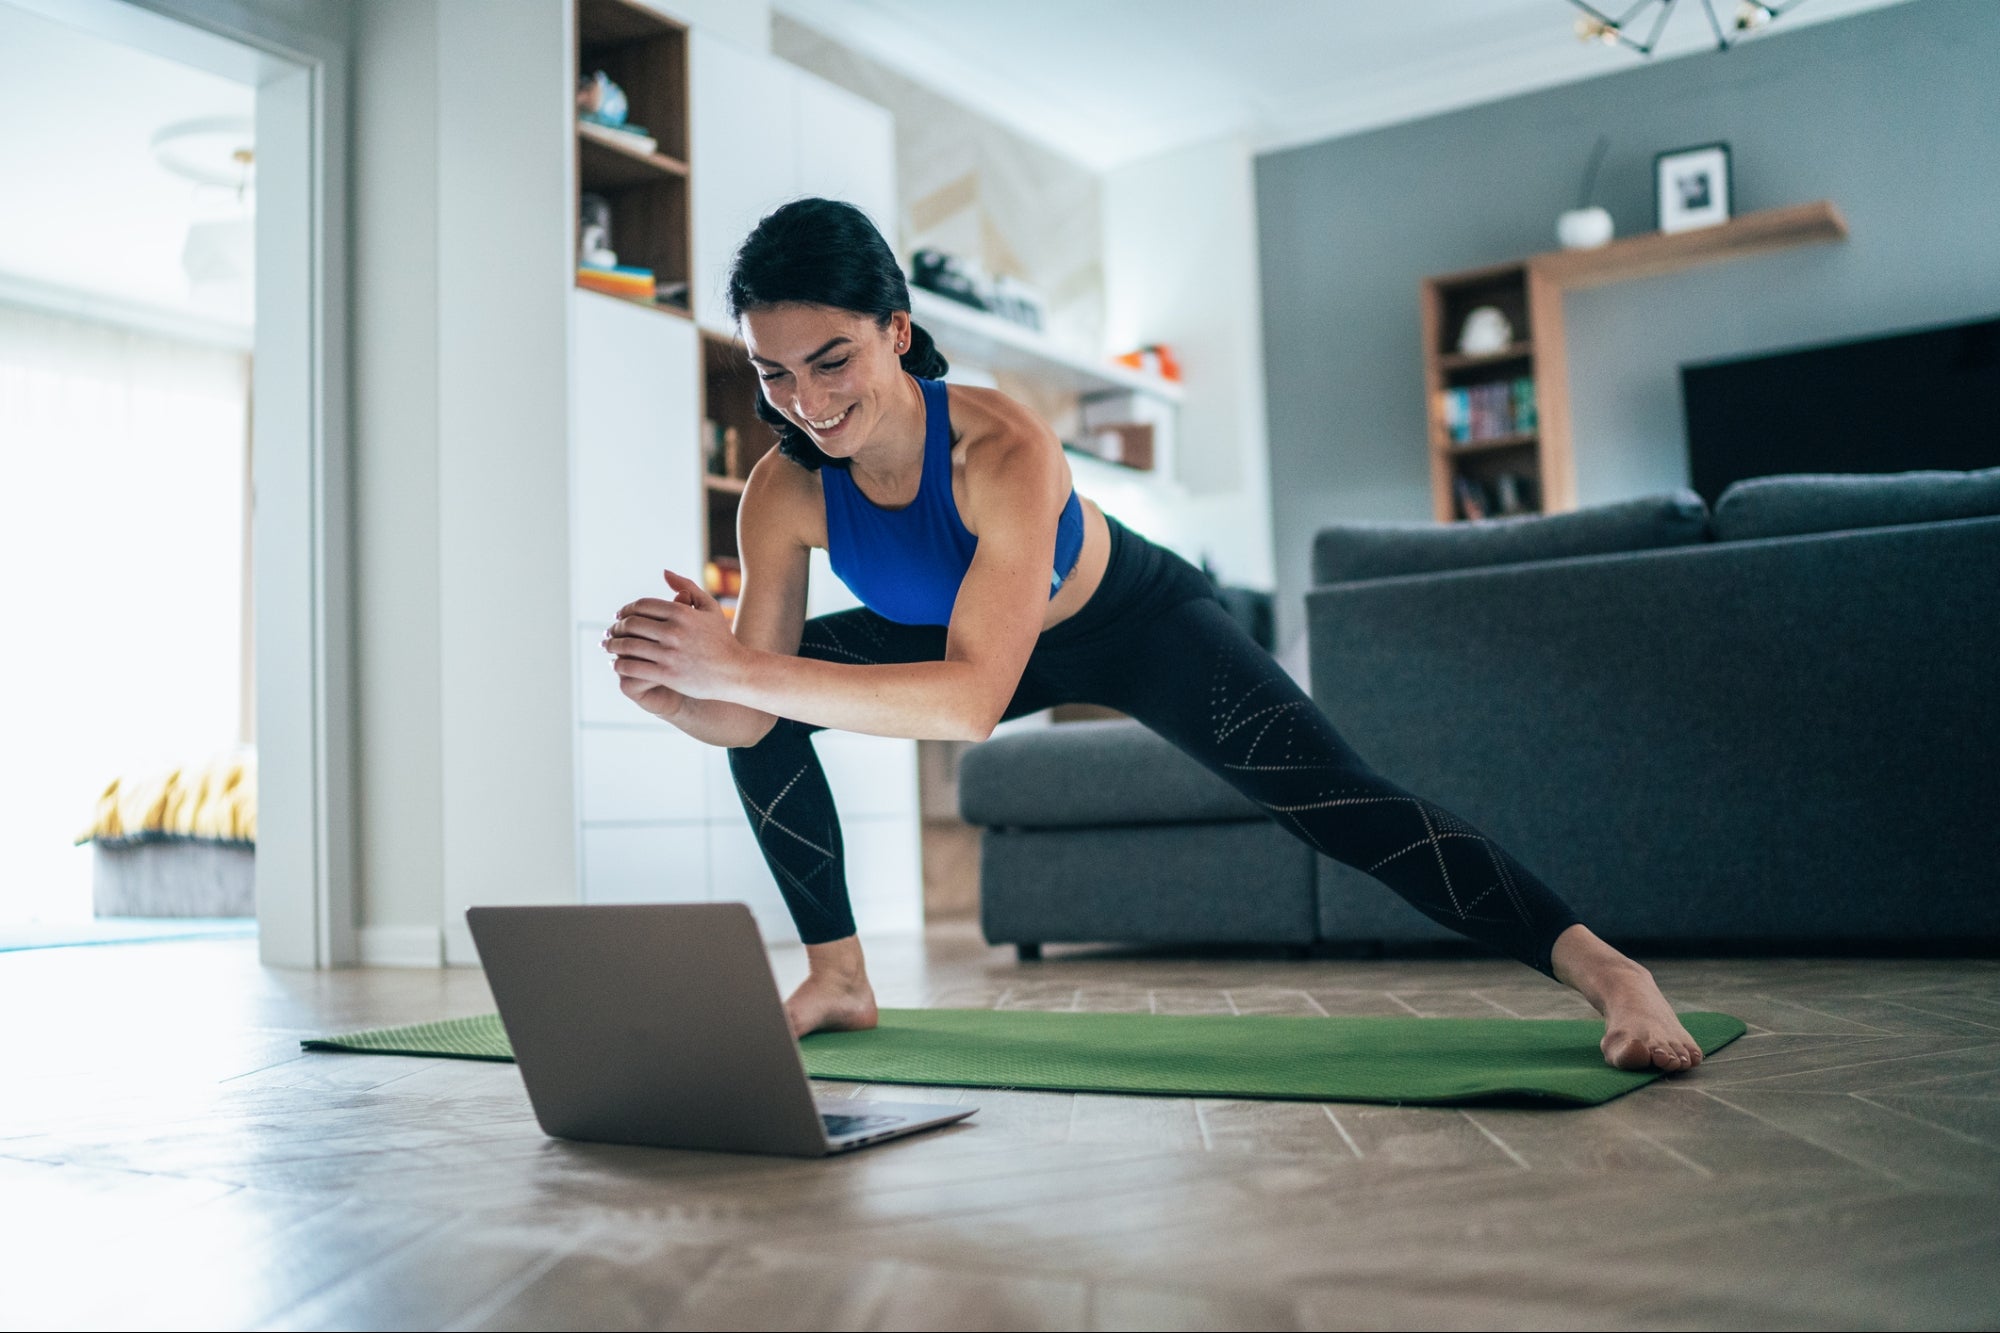 What Do People Look For In Online Fitness Classes?